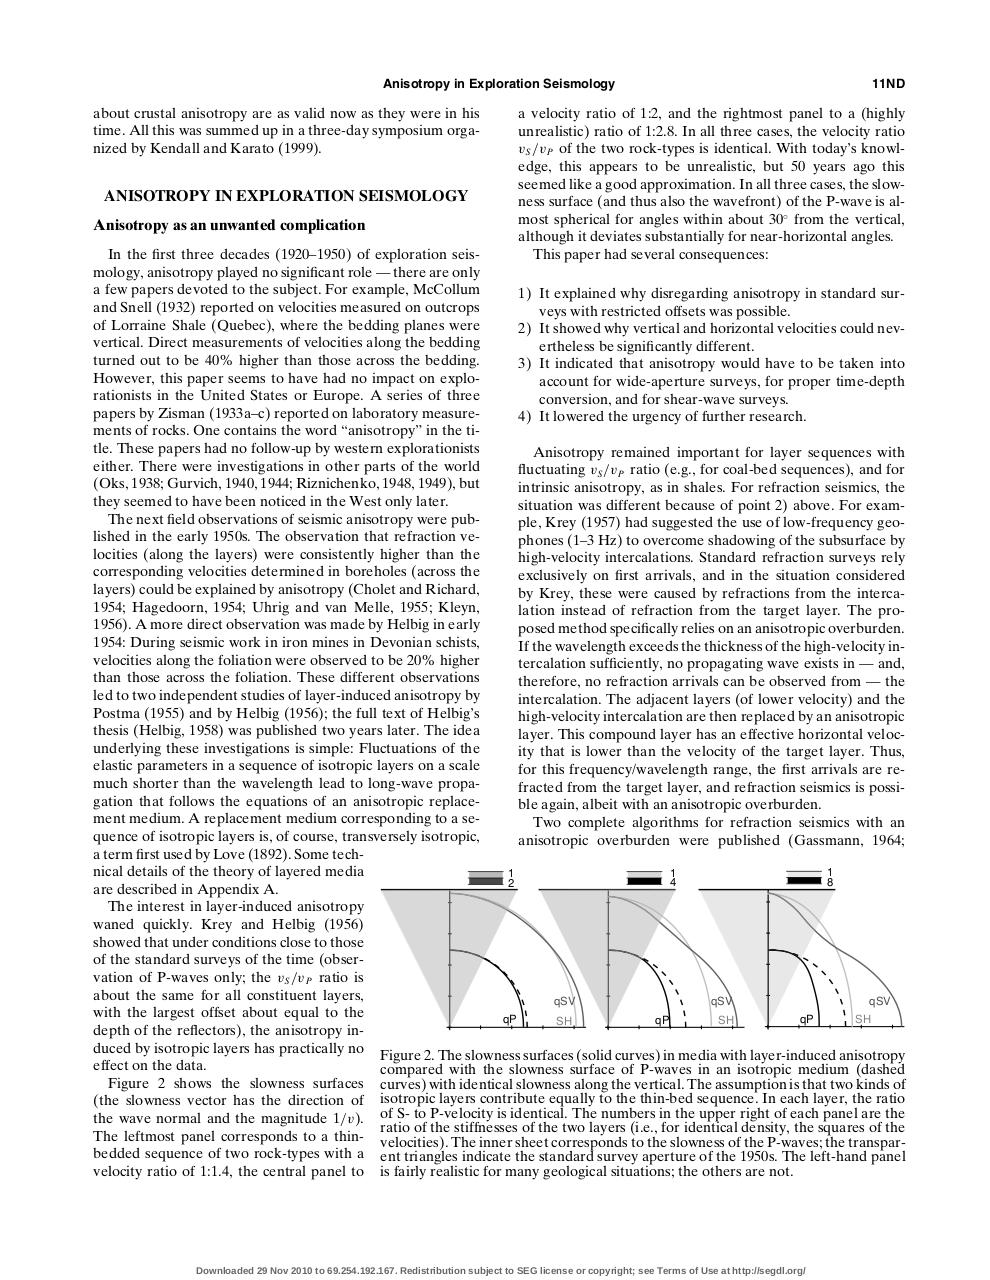 Helbig and Thomsen, 2005, historical review anisotropy 1.pdf - page 3/15